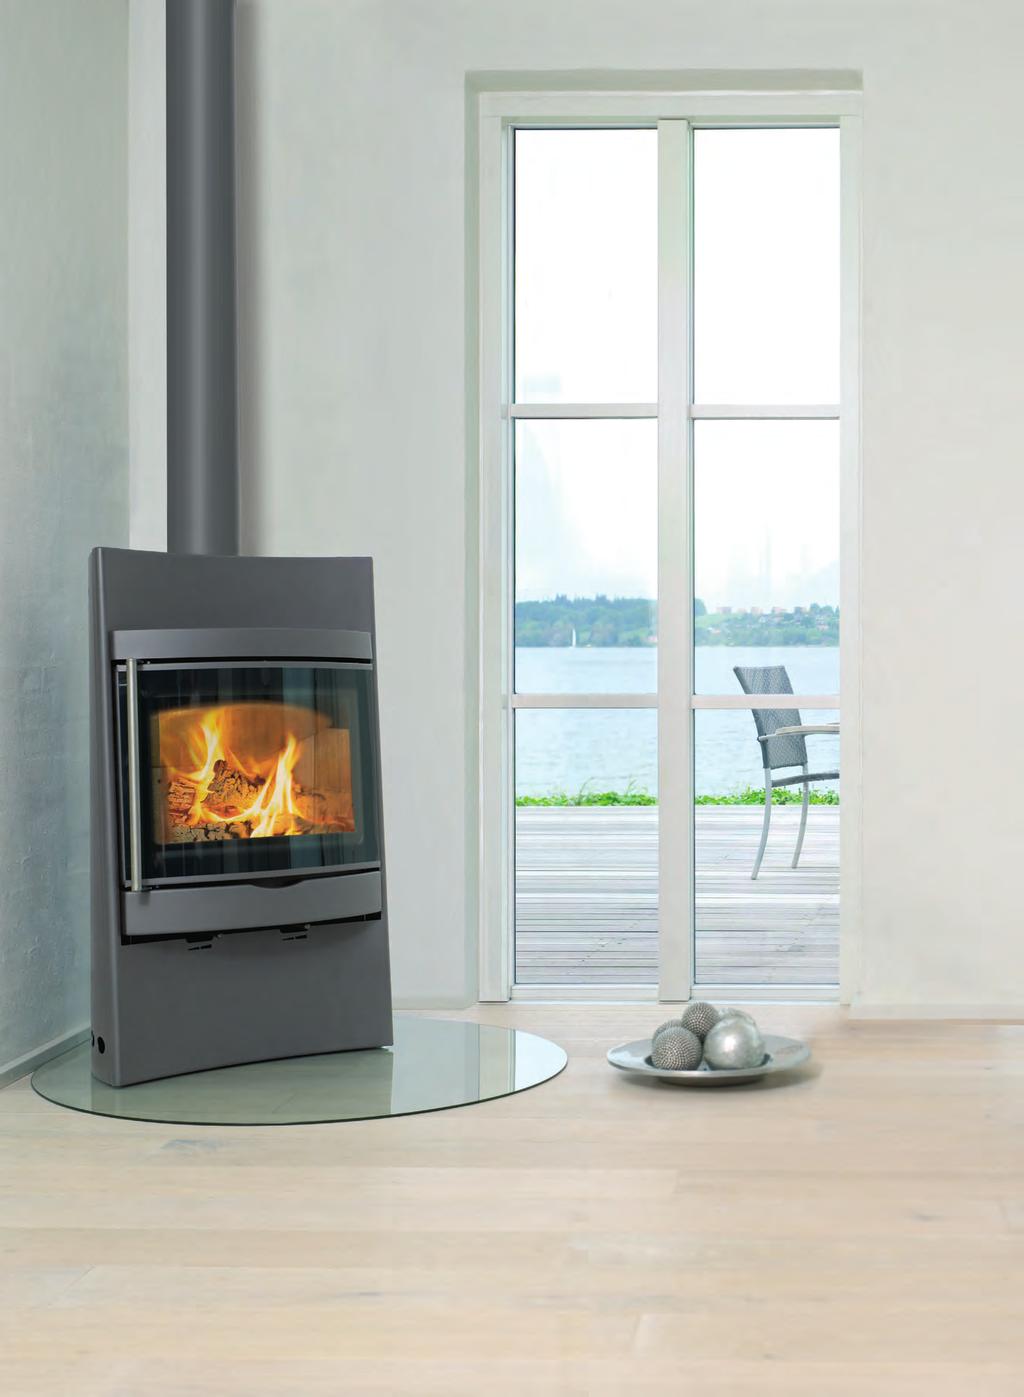 Figaro Euroheat Natural Energy Company A beautiful, eye catching convection stove with a broad side-hinged glass door with wide screen effect.